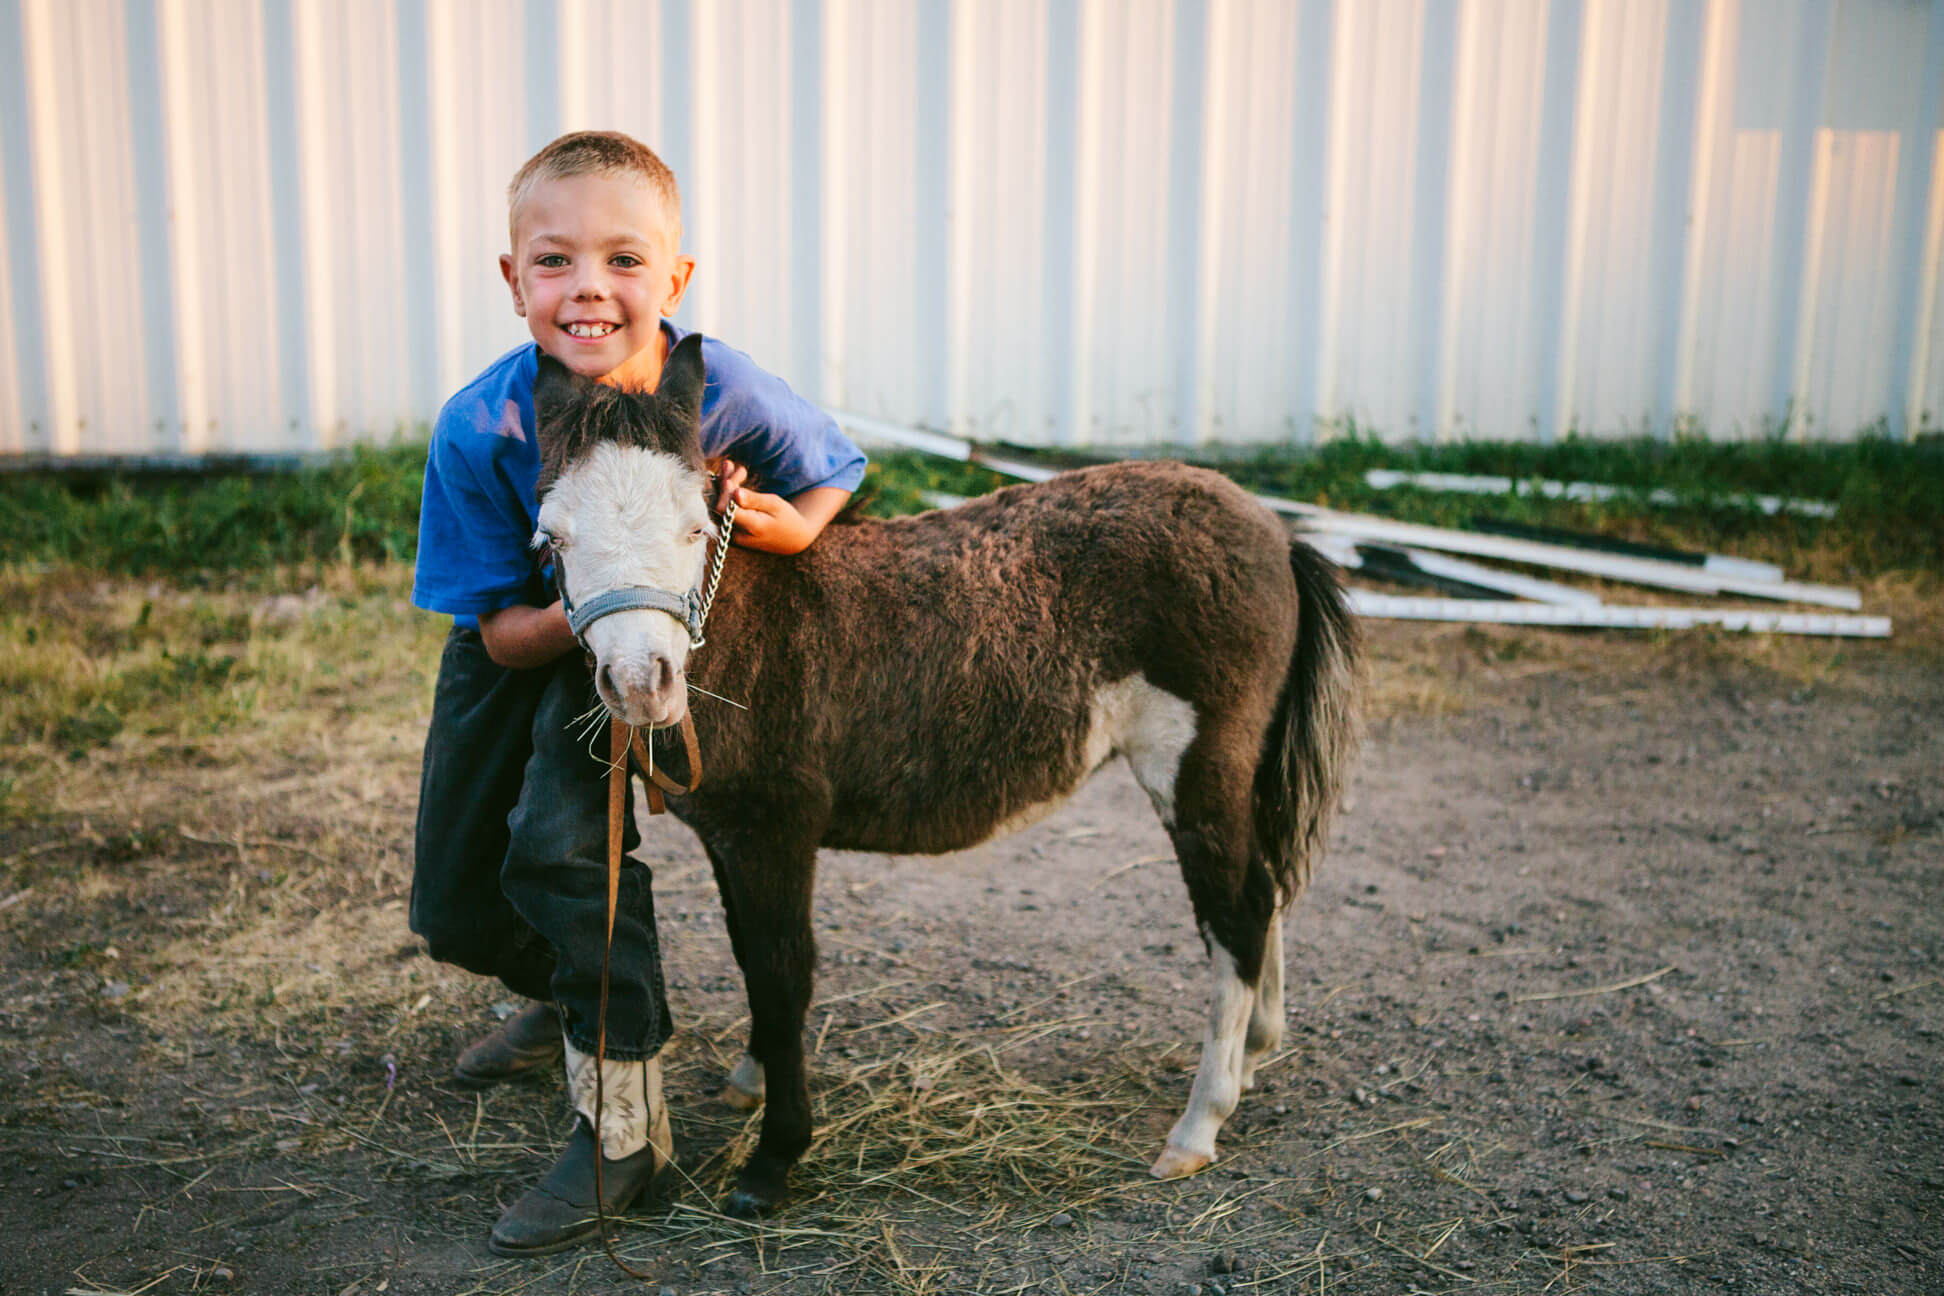 A boy smiles with his pony at the Western Montana State Fair in Missoula Montana